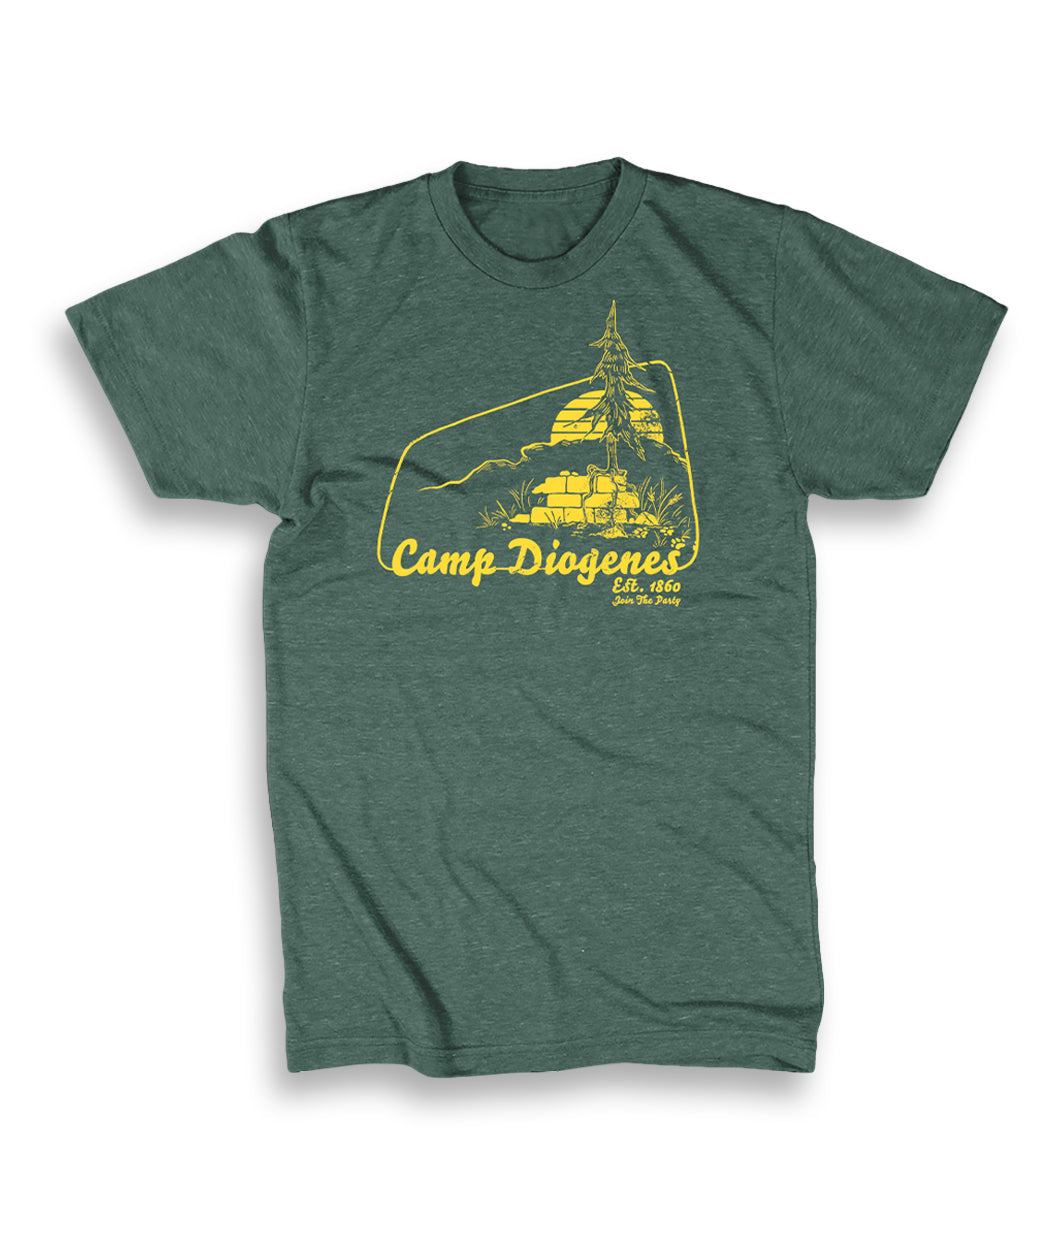 A green shirt with a yellow design of a tree growing from a wall with a sun in the background. It is surrounded by a yellow line and the words "Camp Diogenes; Est 1860; Join the Party". 